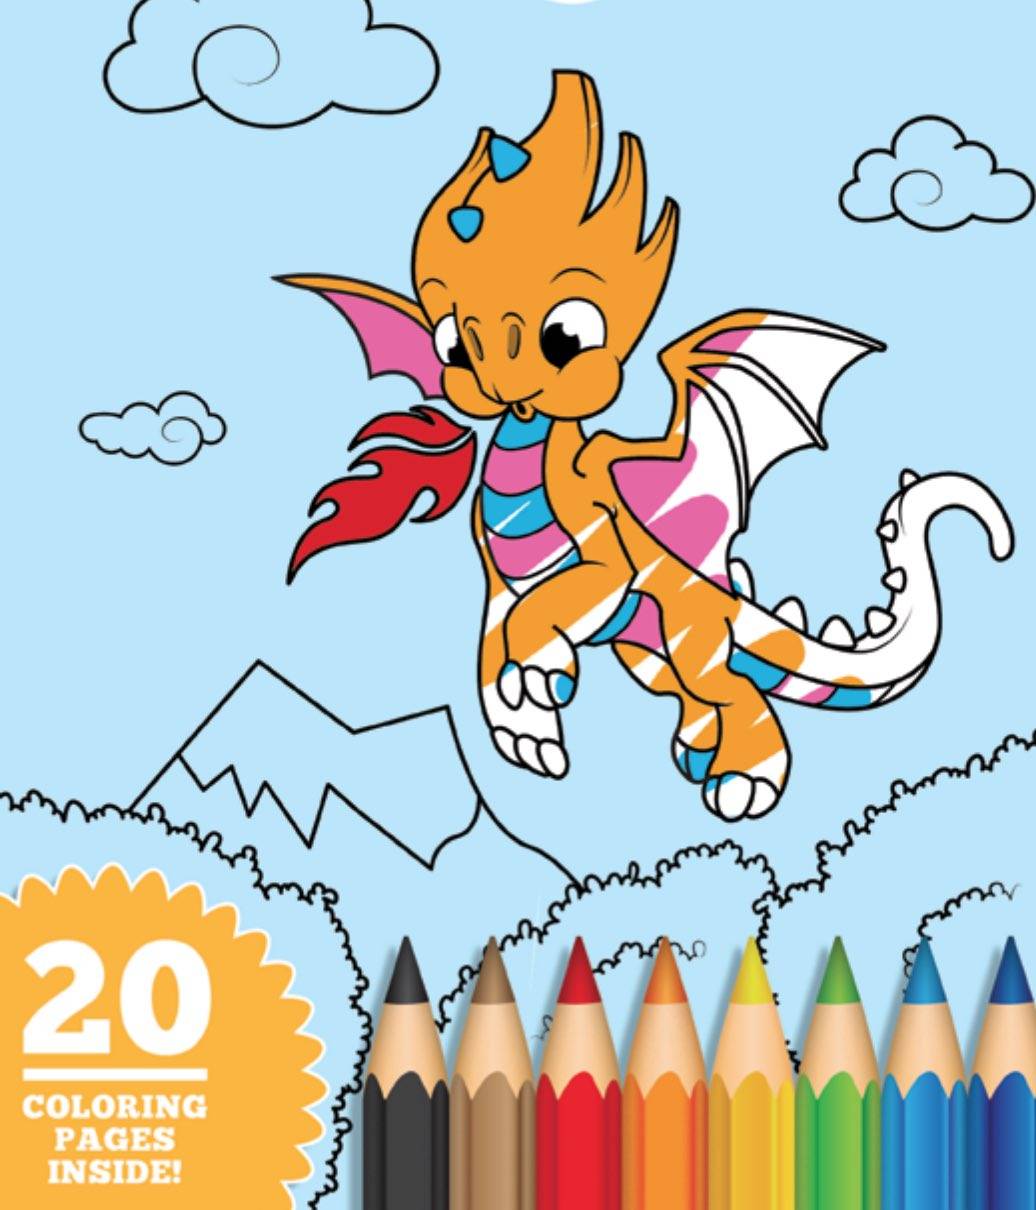 Dragon Colouring Book   cute colouring for young children   Free ...